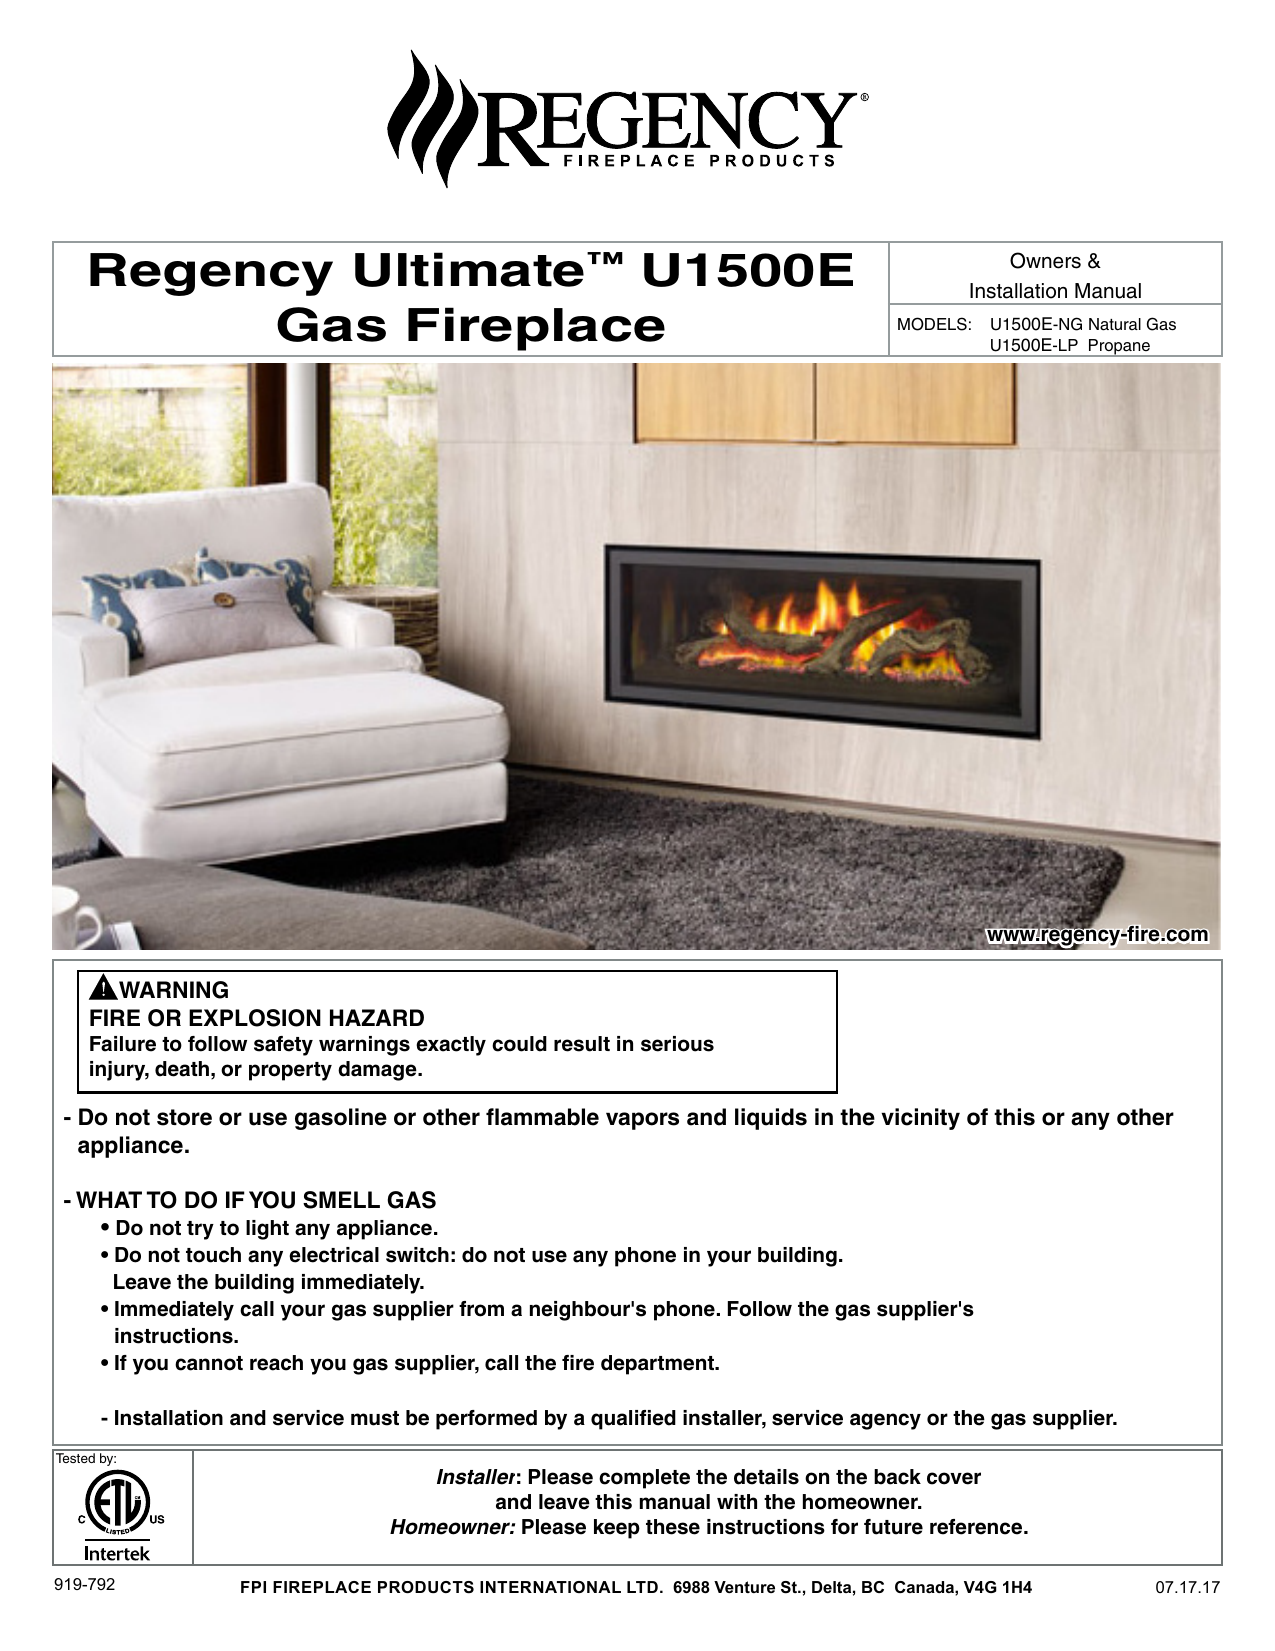 Electric Wall Mounted Fireplaces Clearance Awesome Regency Ultimateâ¢ U1500e Gas Fireplace